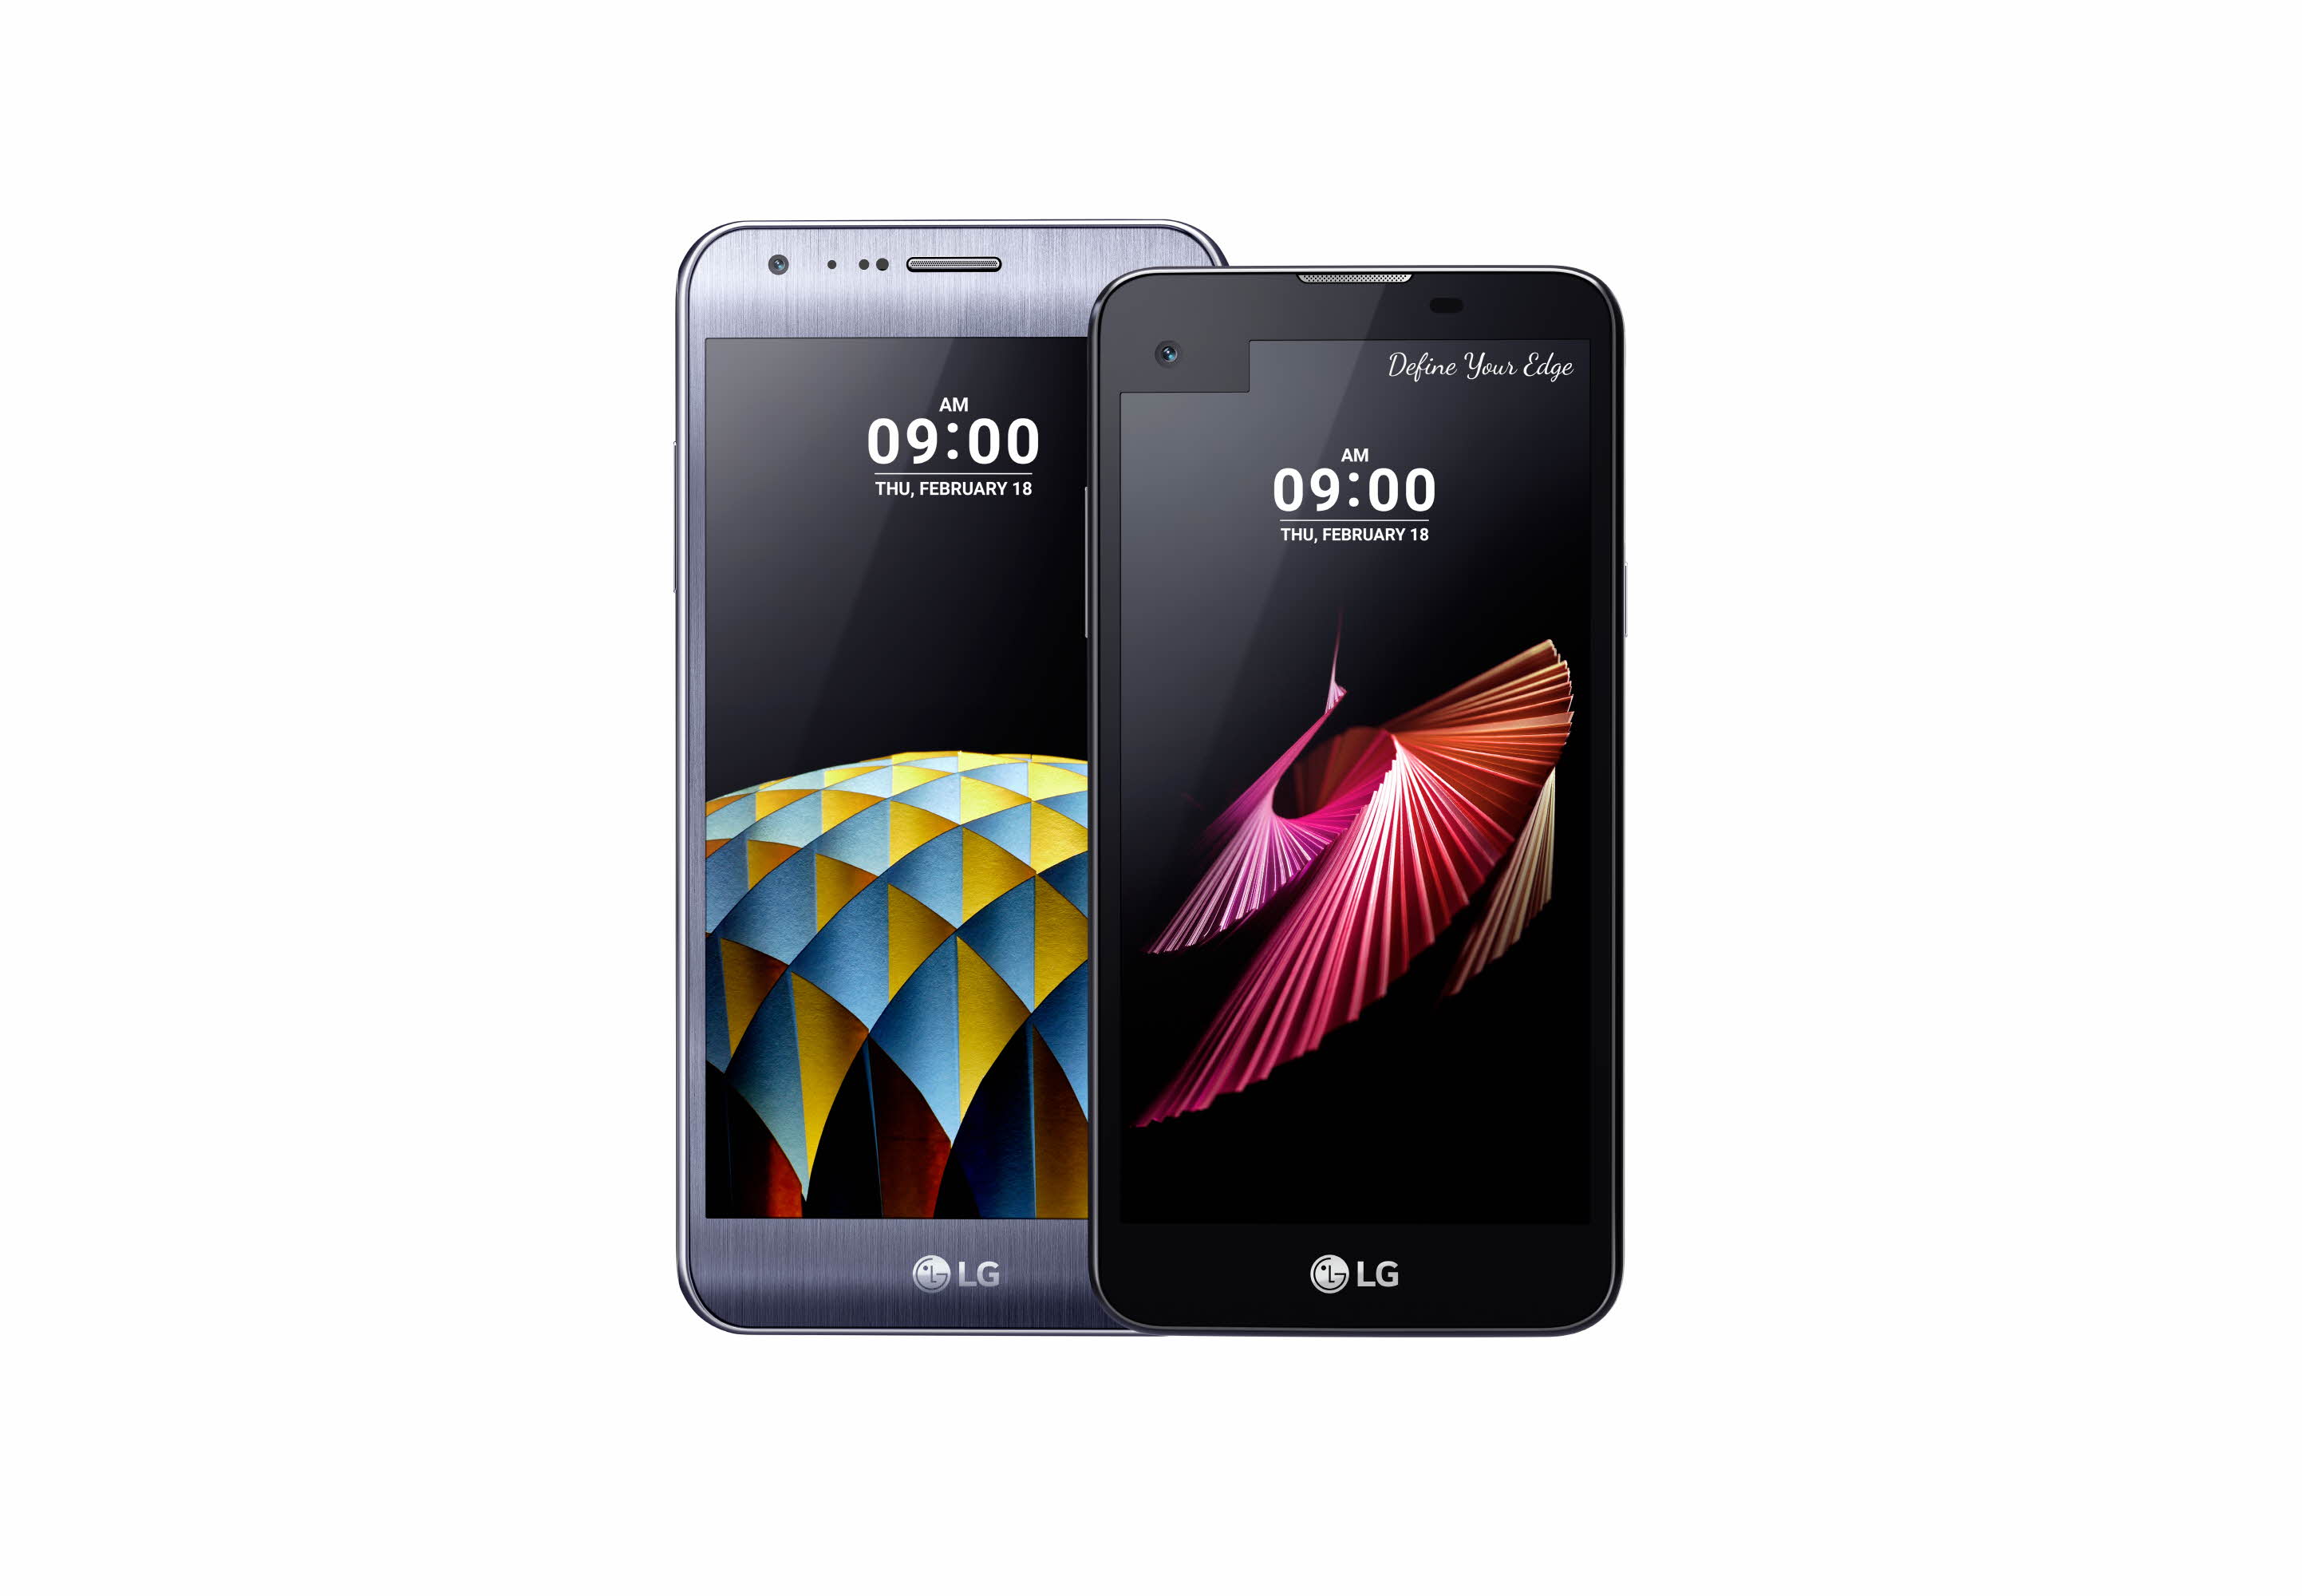 LG-K8-smartphone-with-5-inch-display-and-Android-Marshmallow-OS